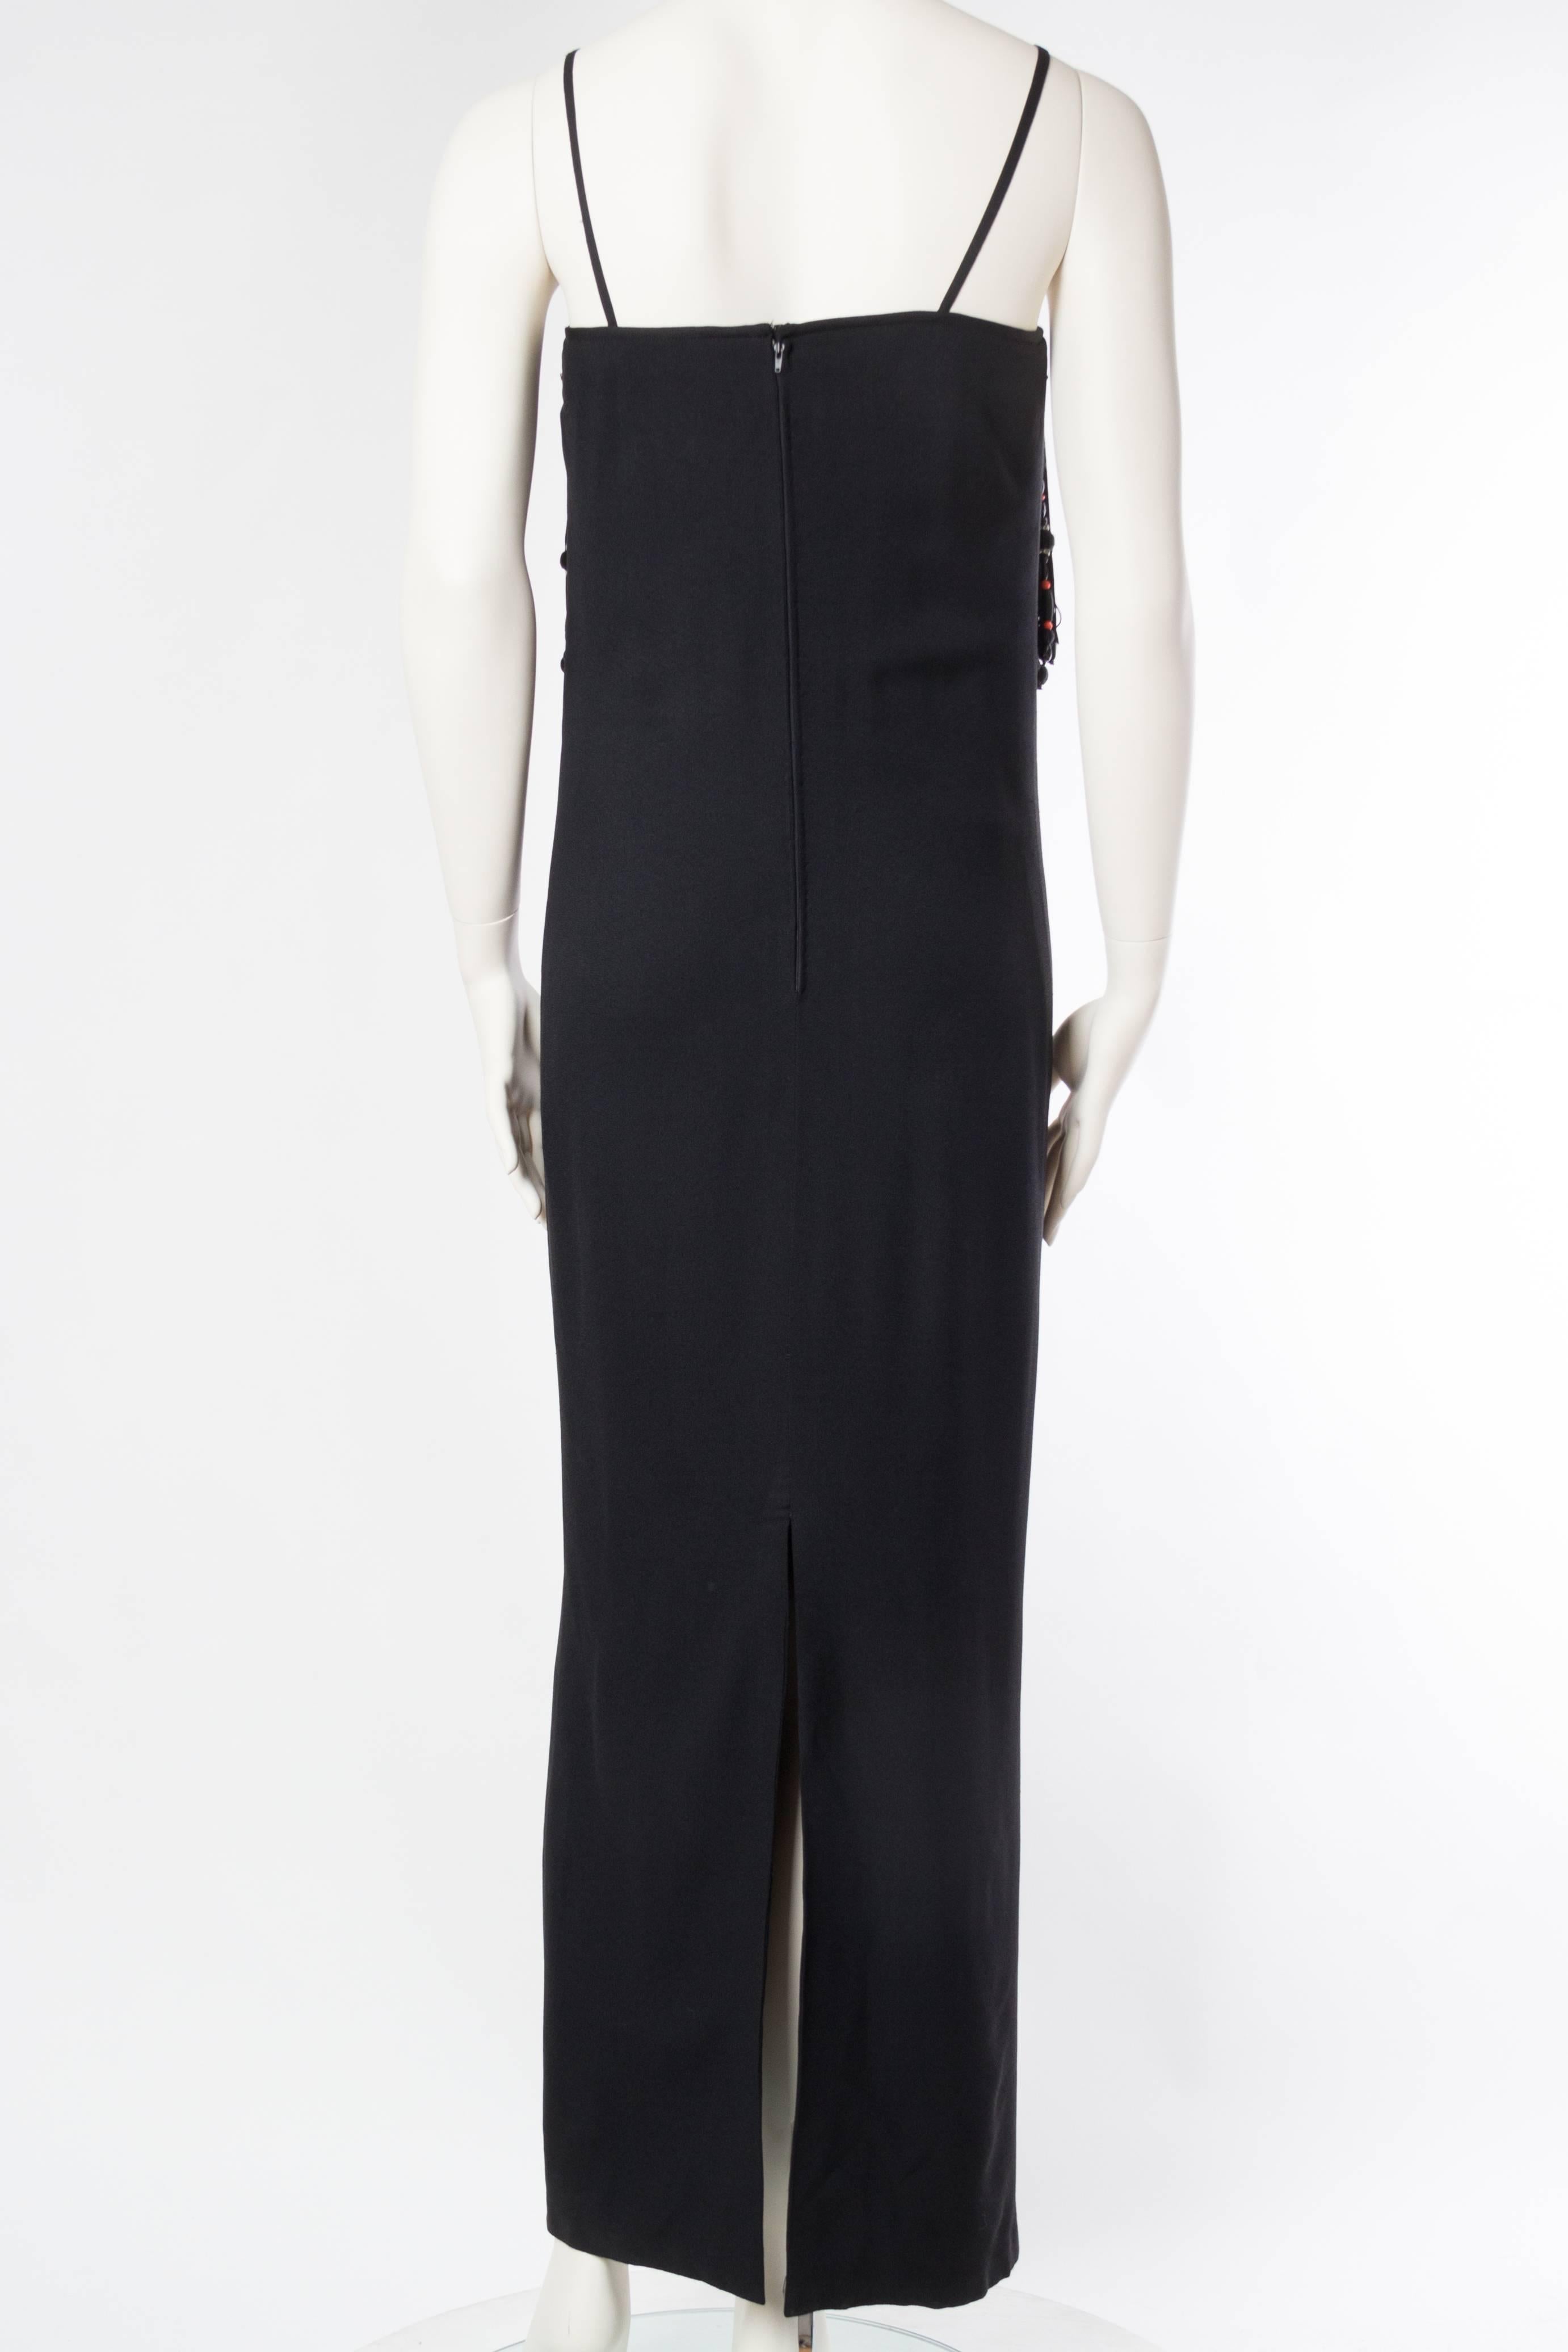 Women's 1970S VALENTINO Black Silk Crepe Gown With Beaded Crystal Roses & Epic Passemen For Sale